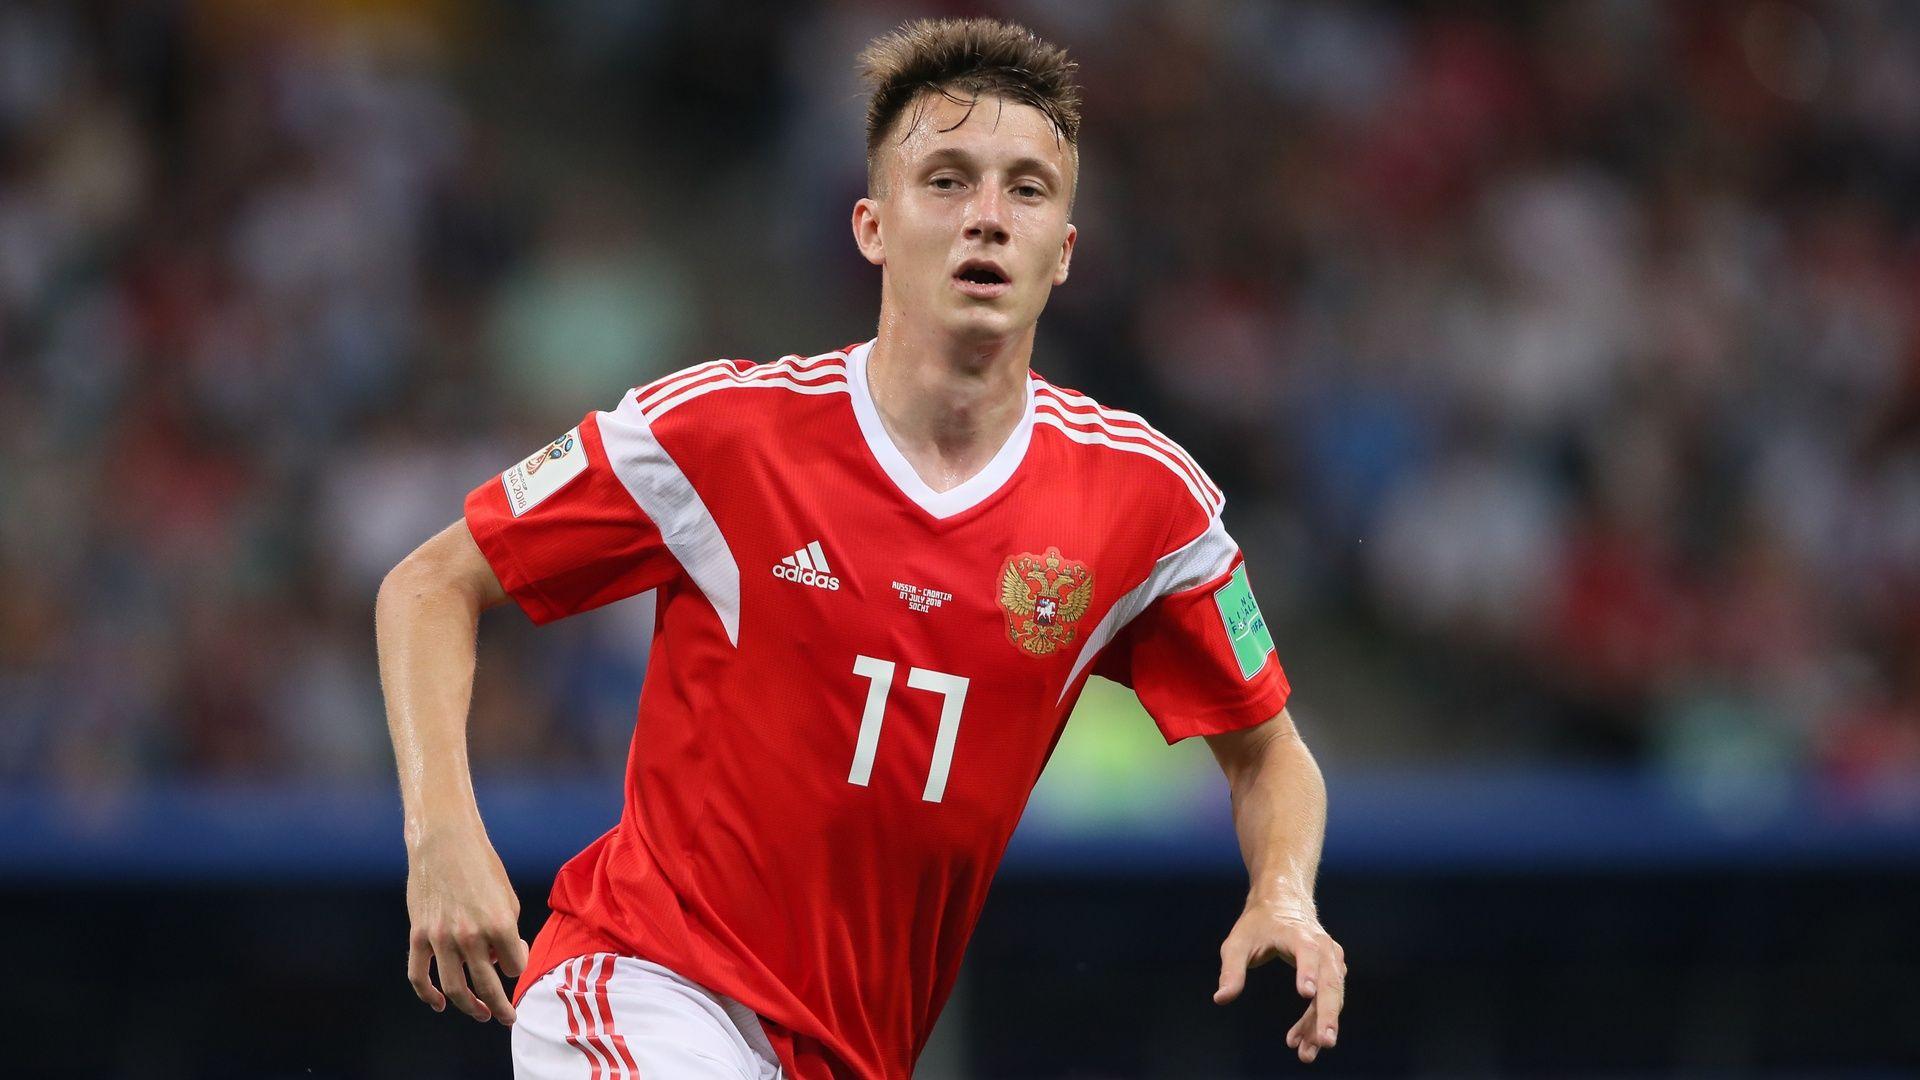 Golovin completes €30m move to Monaco from CSKA Moscow